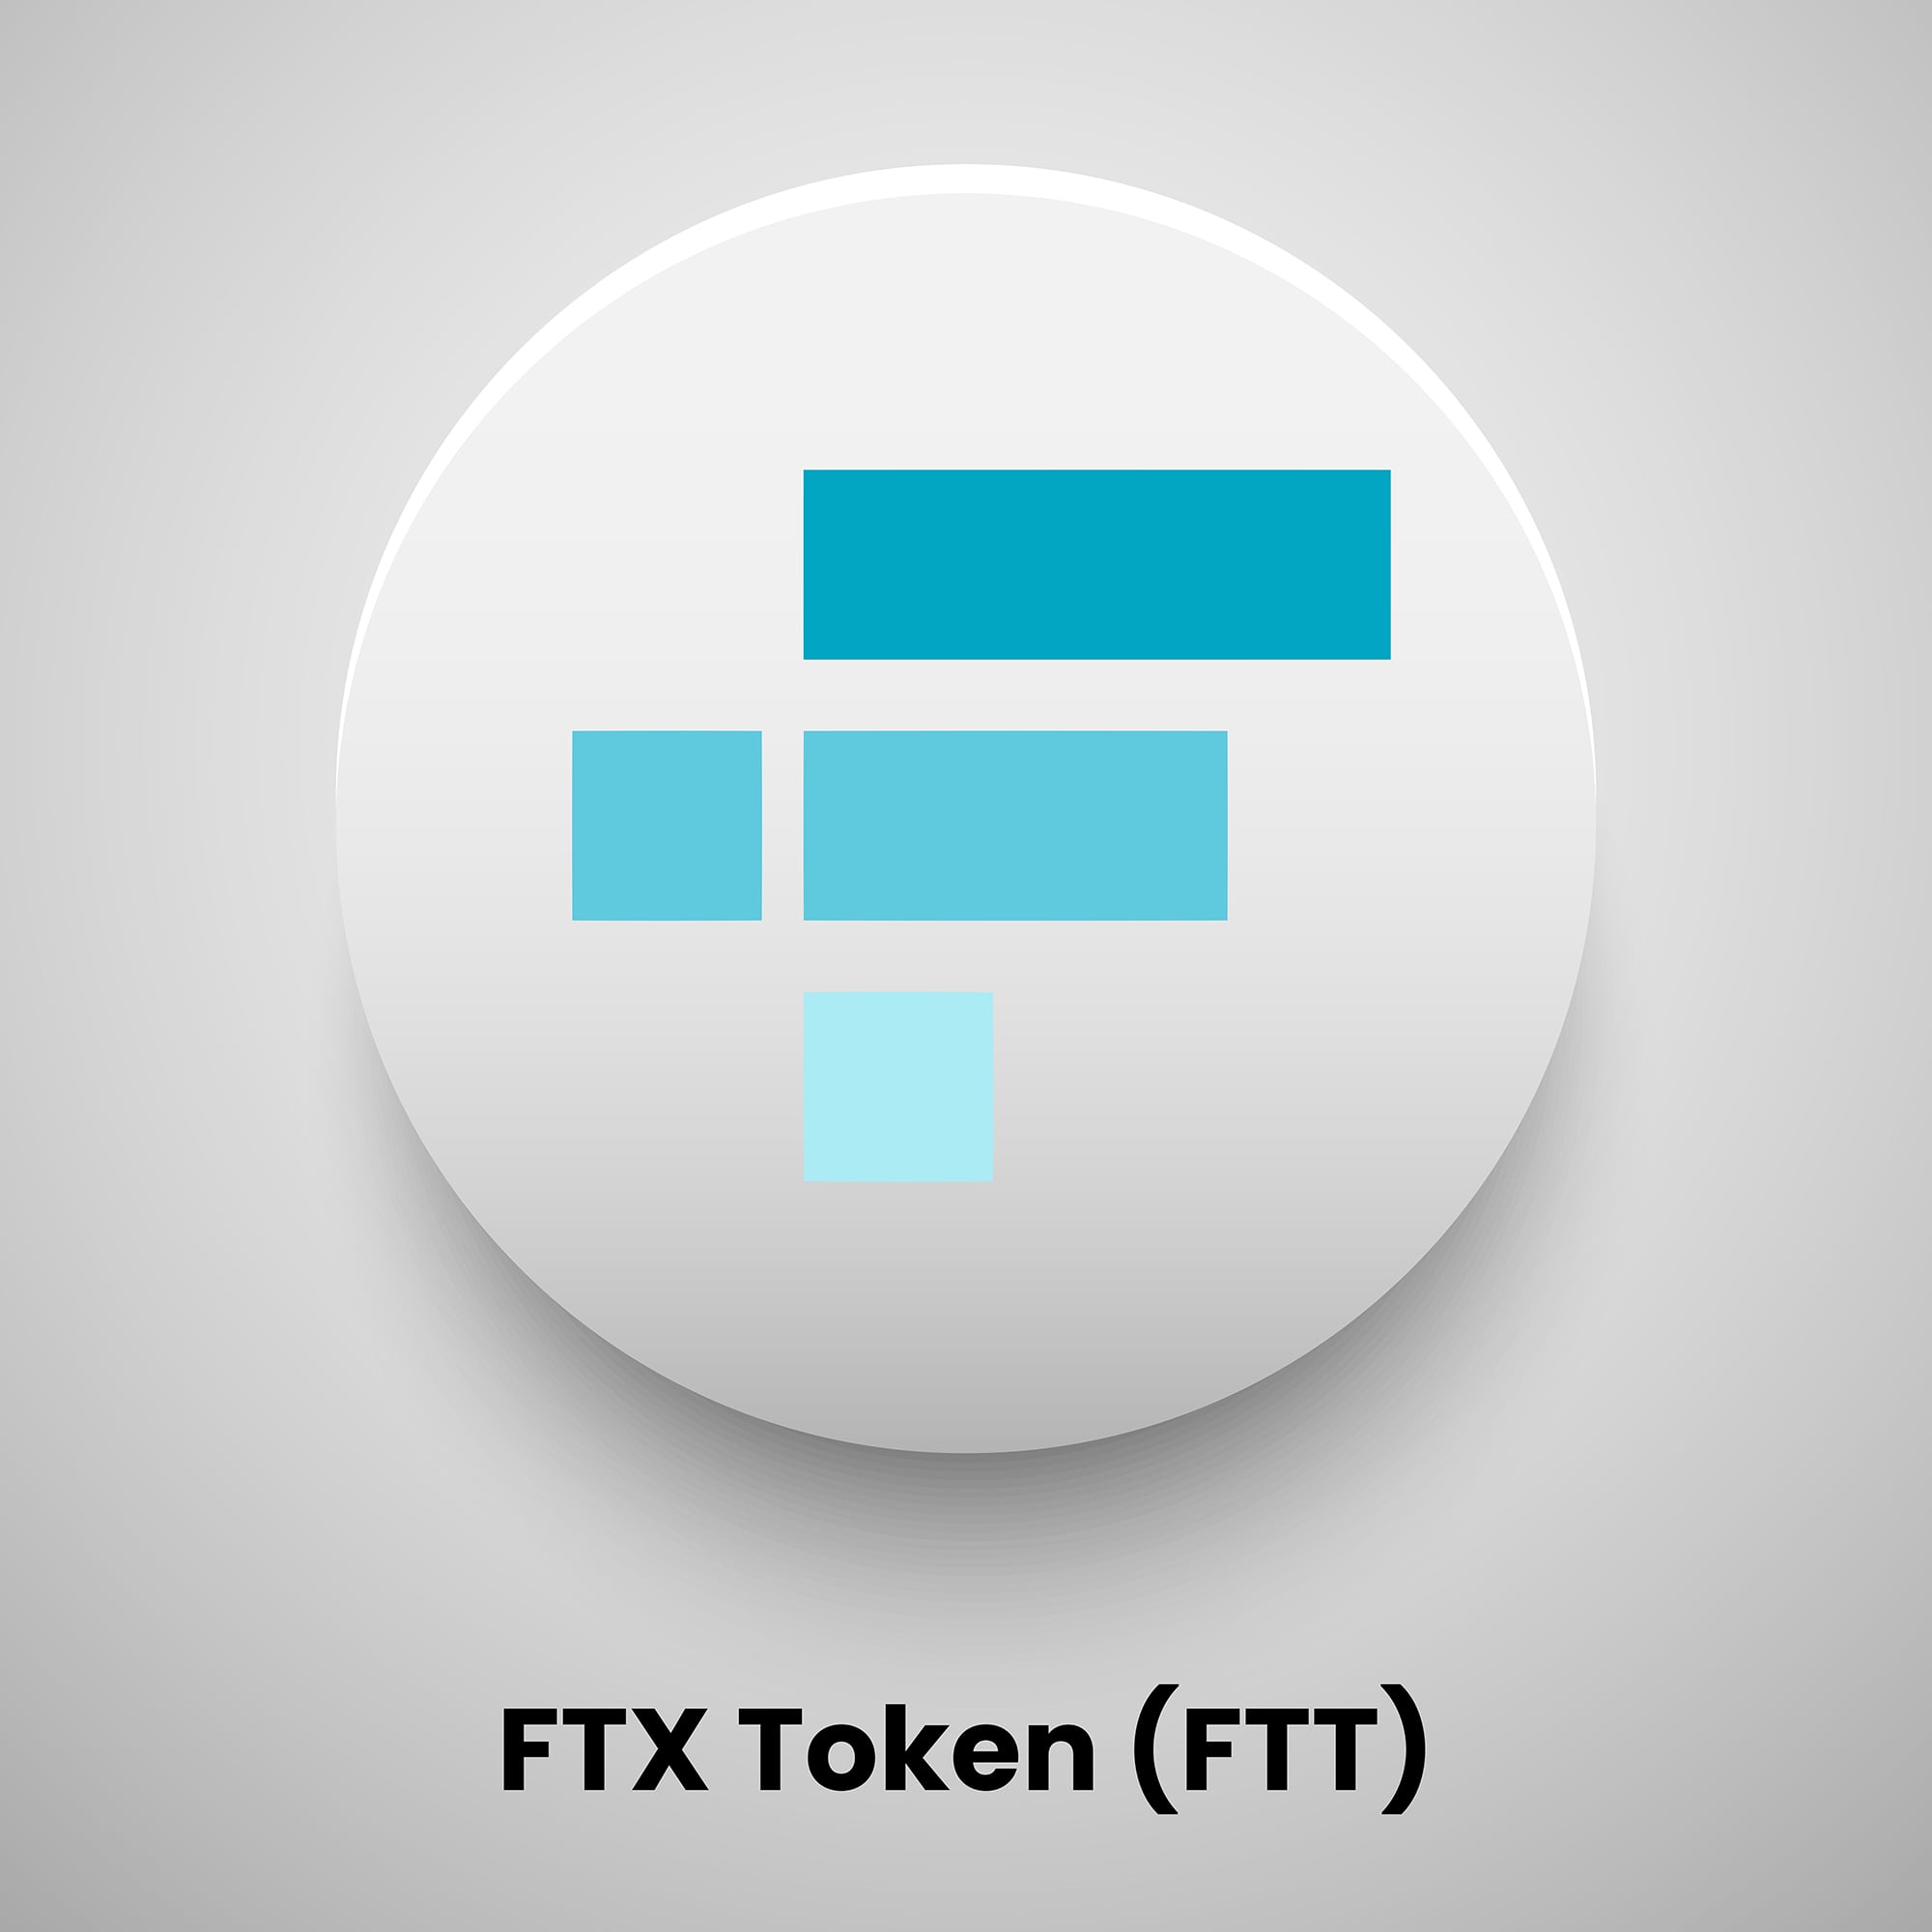 FTX Token (FTT) crypto currency logo free vector download